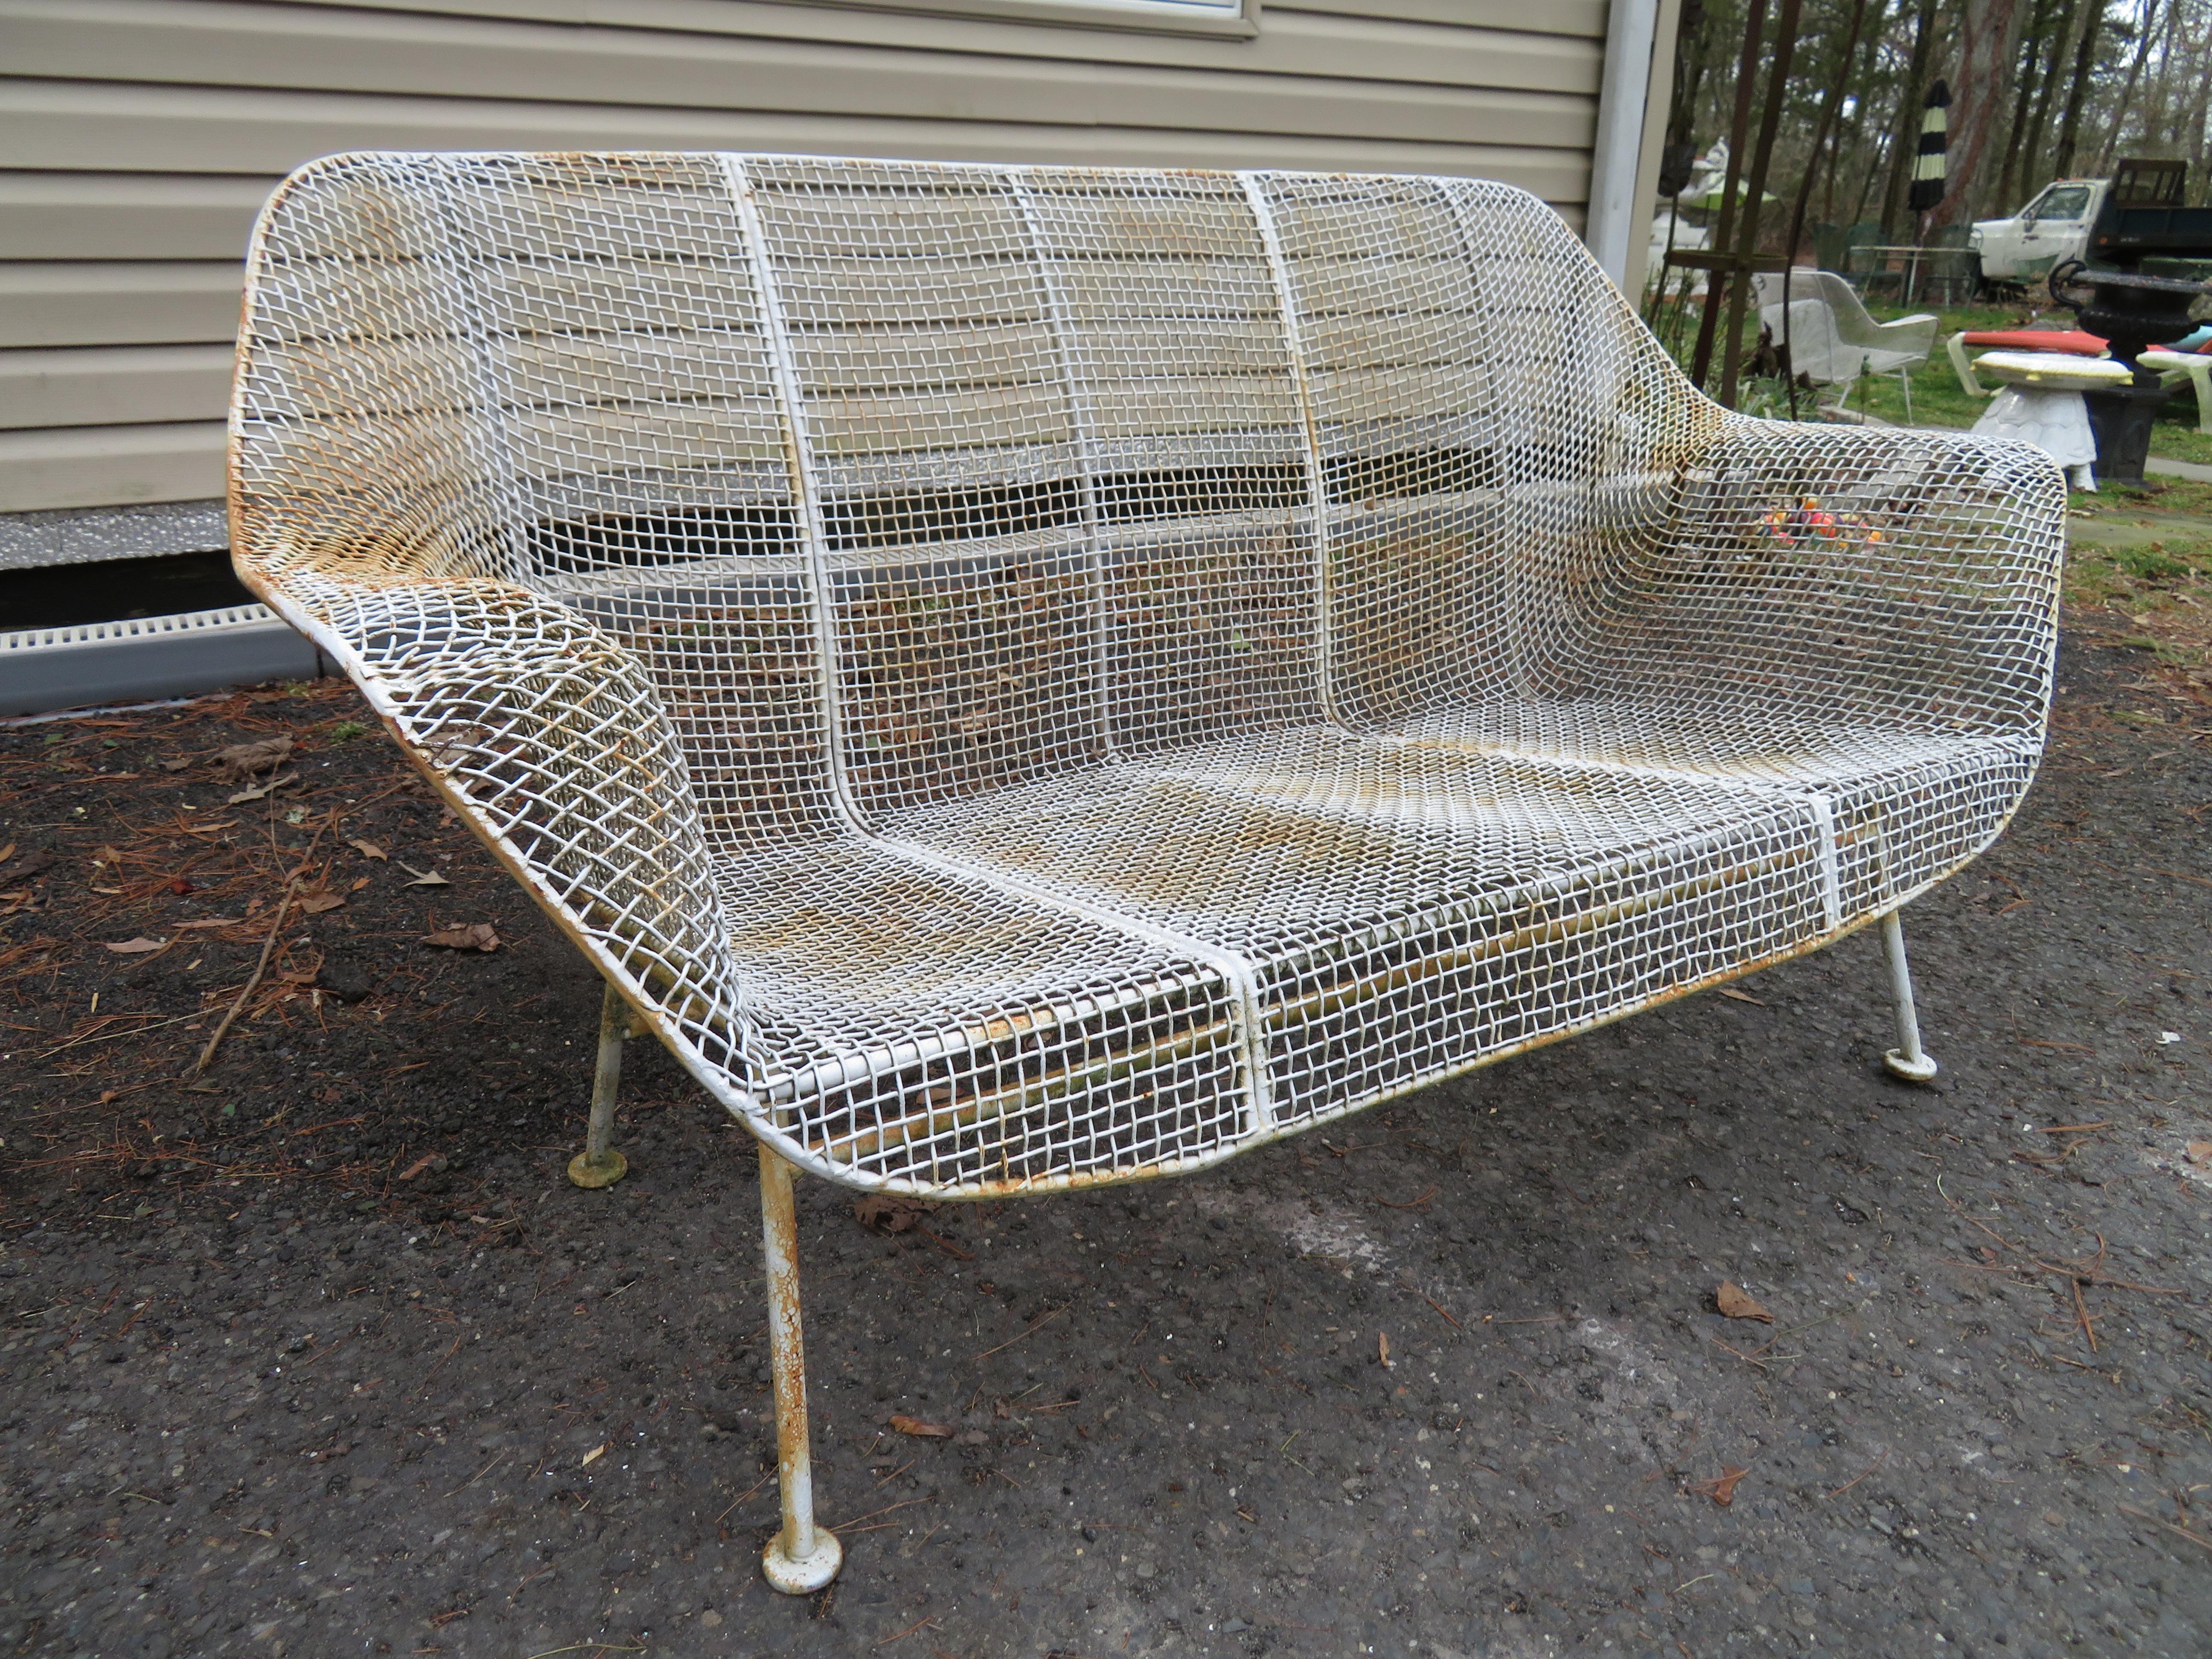 Russell Woodard Patio Sculptura patio bench sofa. It has a wrought iron frame with a low-slung woven mesh steel seat made to withstand all weather conditions. Perfect for outdoor lounging!